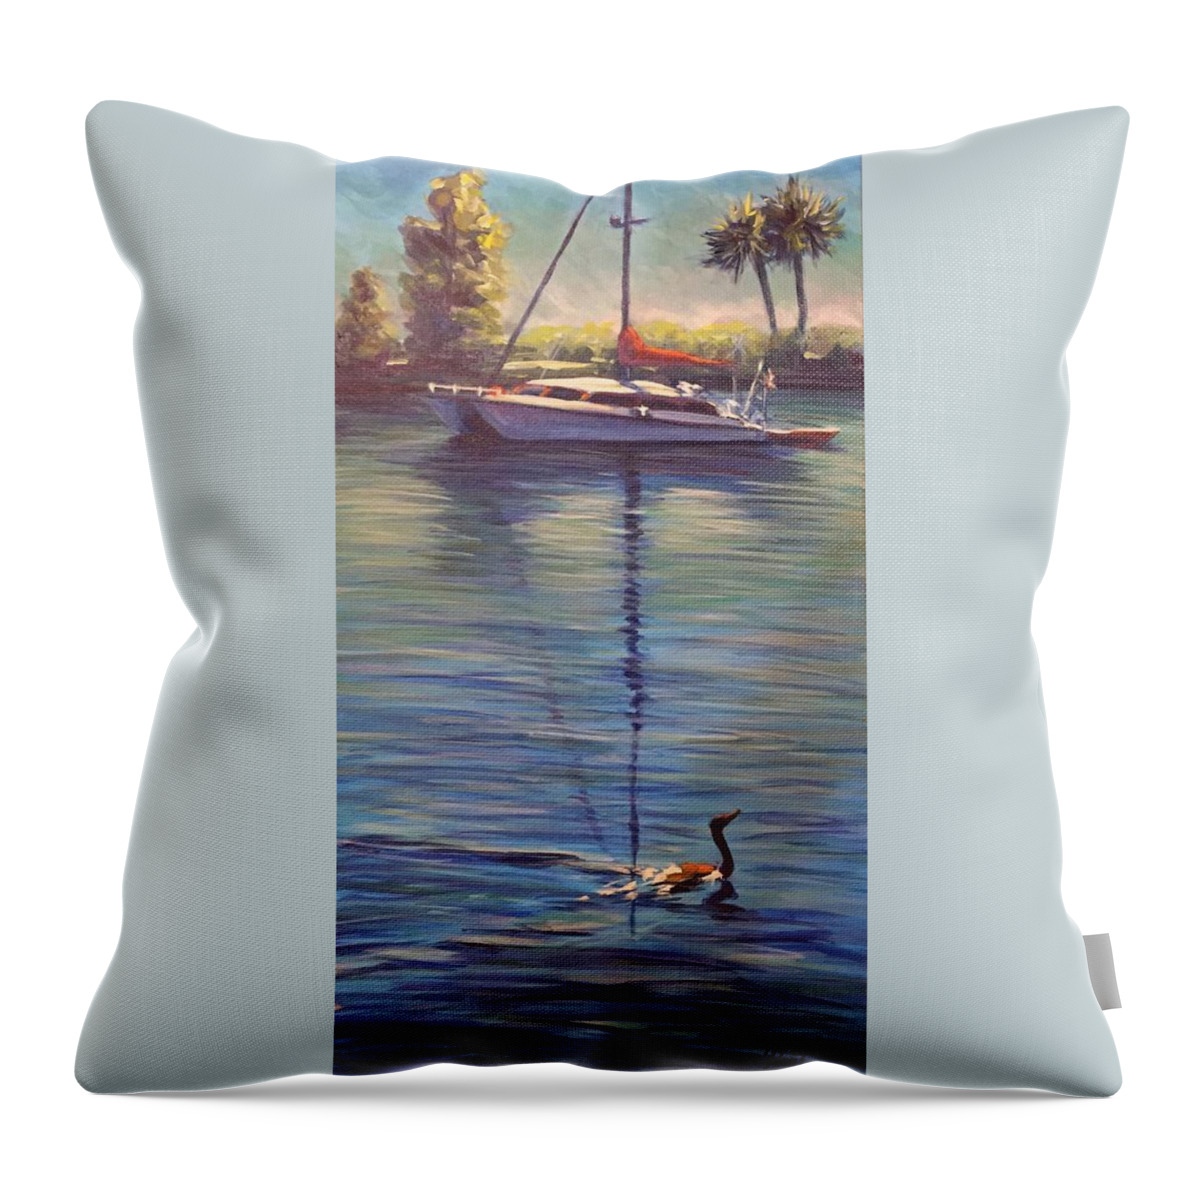 Sailboat Throw Pillow featuring the painting Indian River Lagoon 1,Sailboat by Gretchen Ten Eyck Hunt